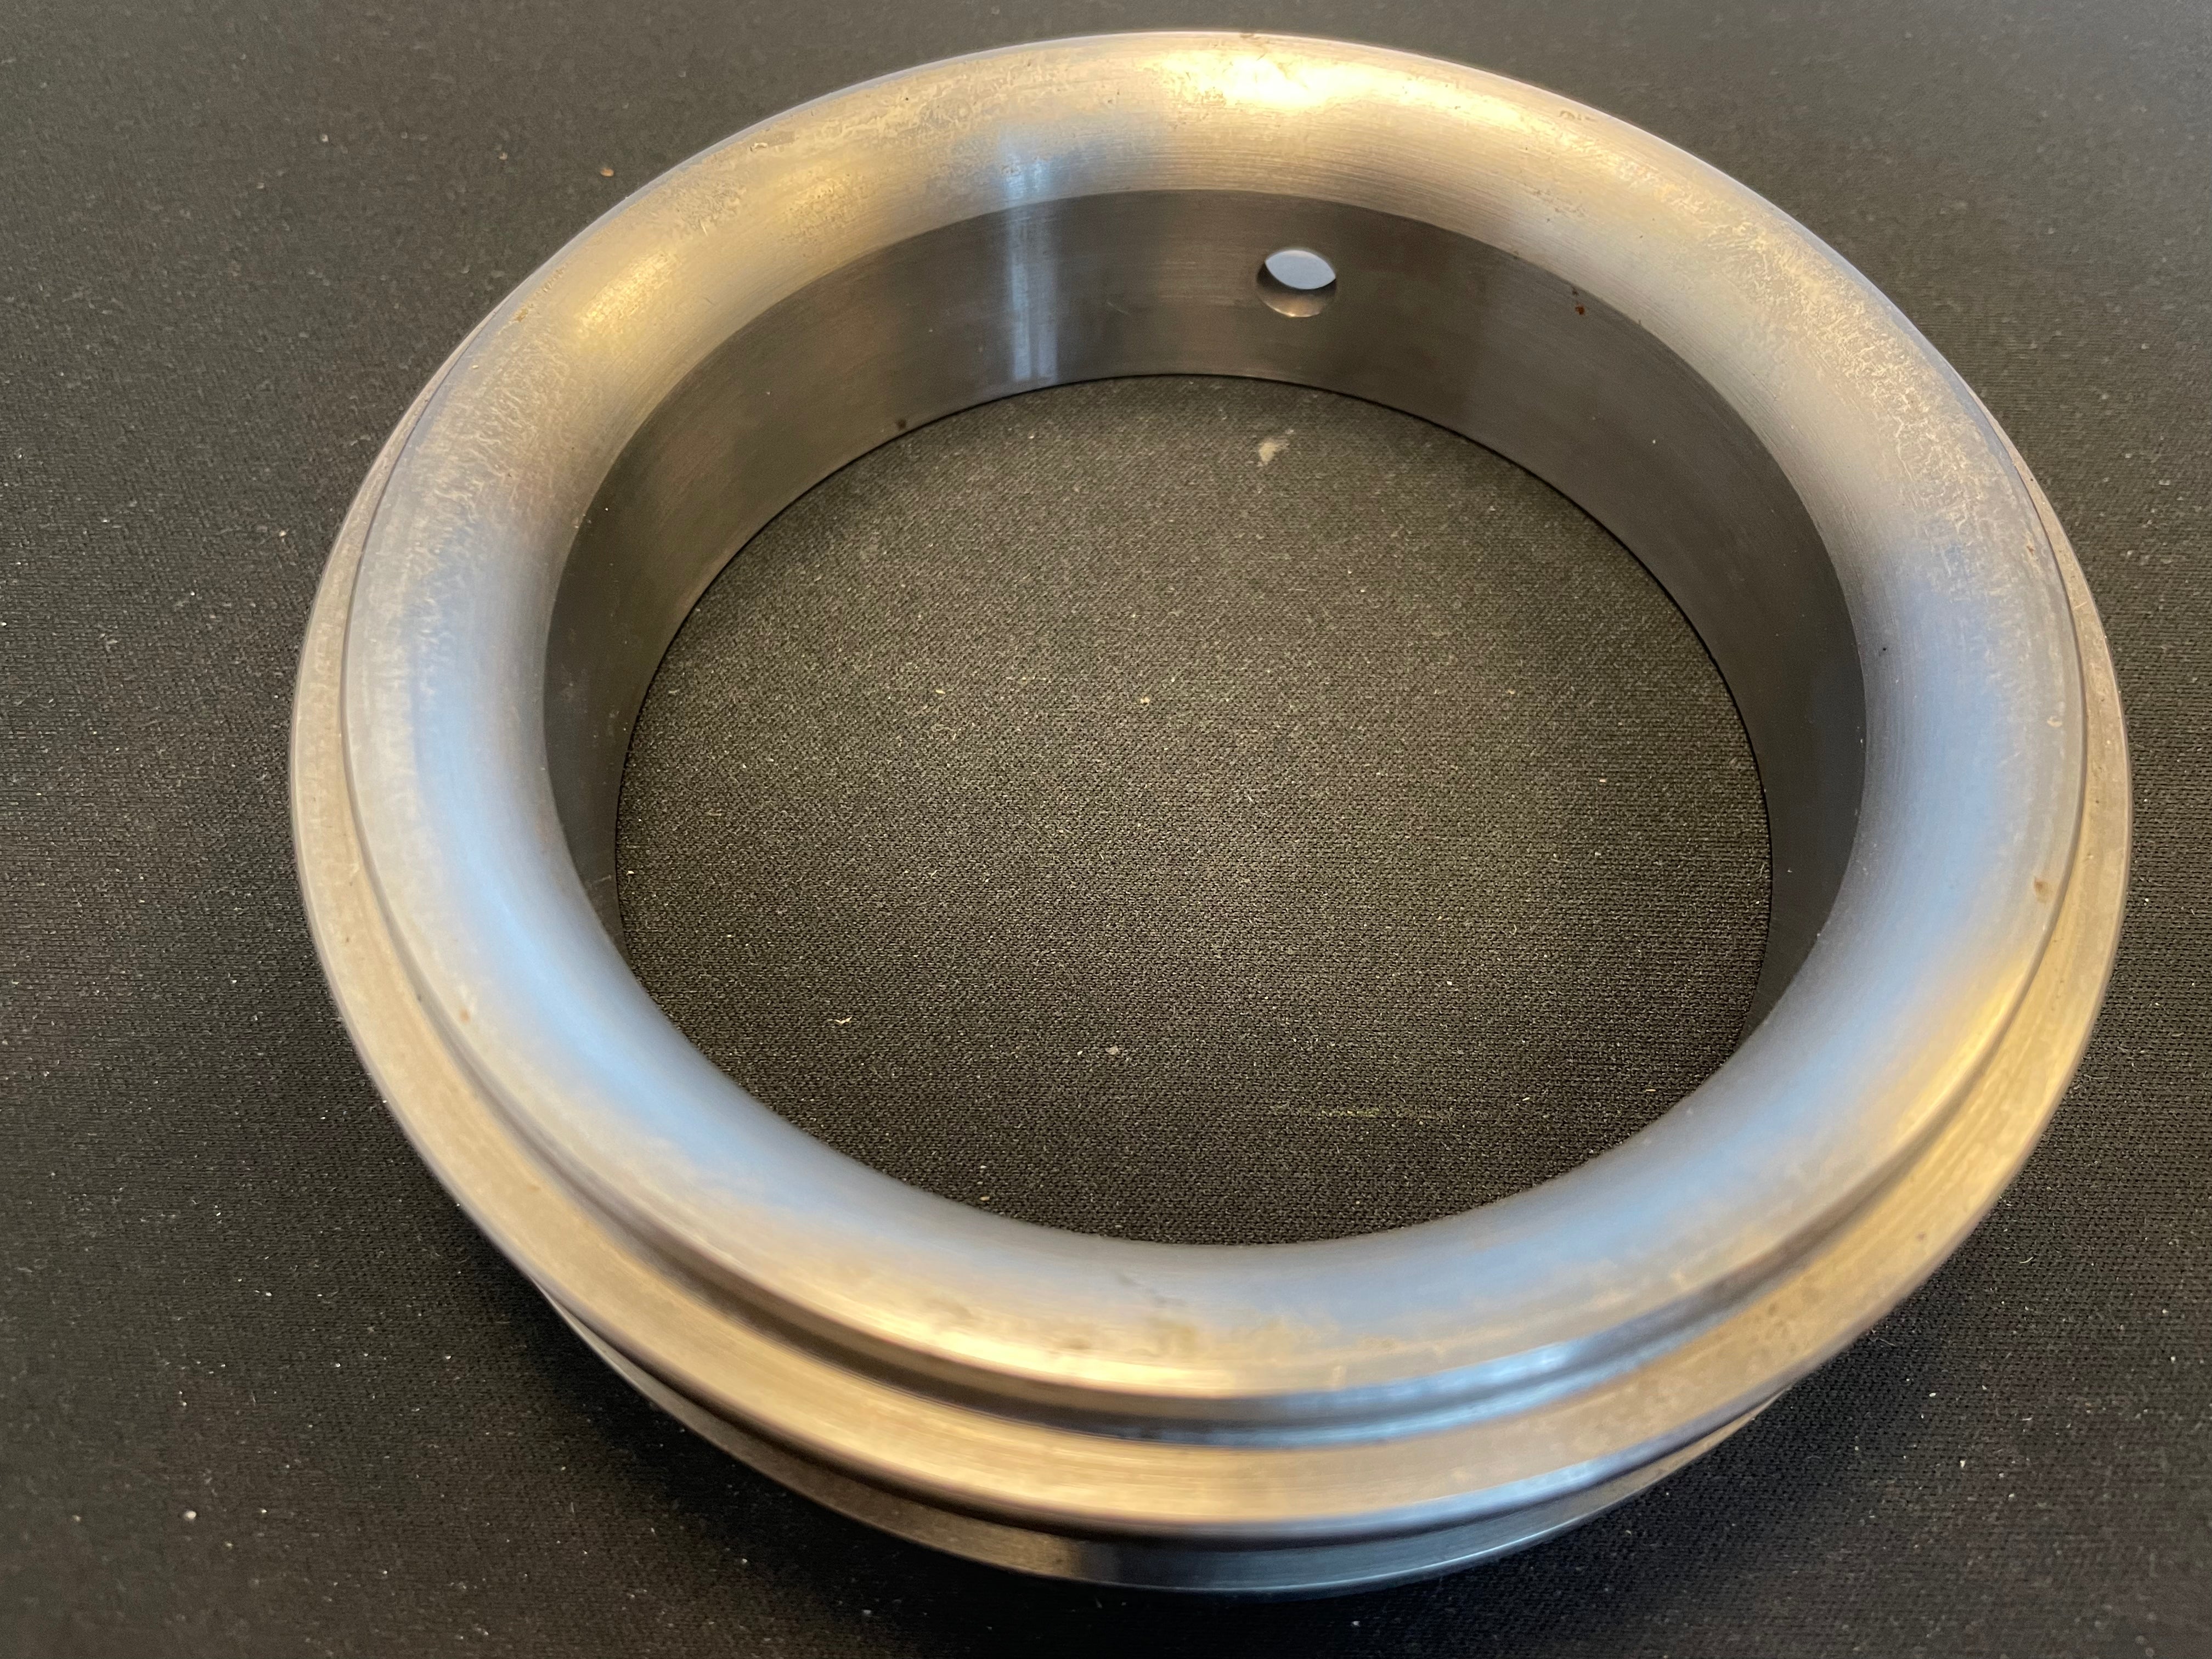 Engaging Cone for 5" Clutch in Stokes 328